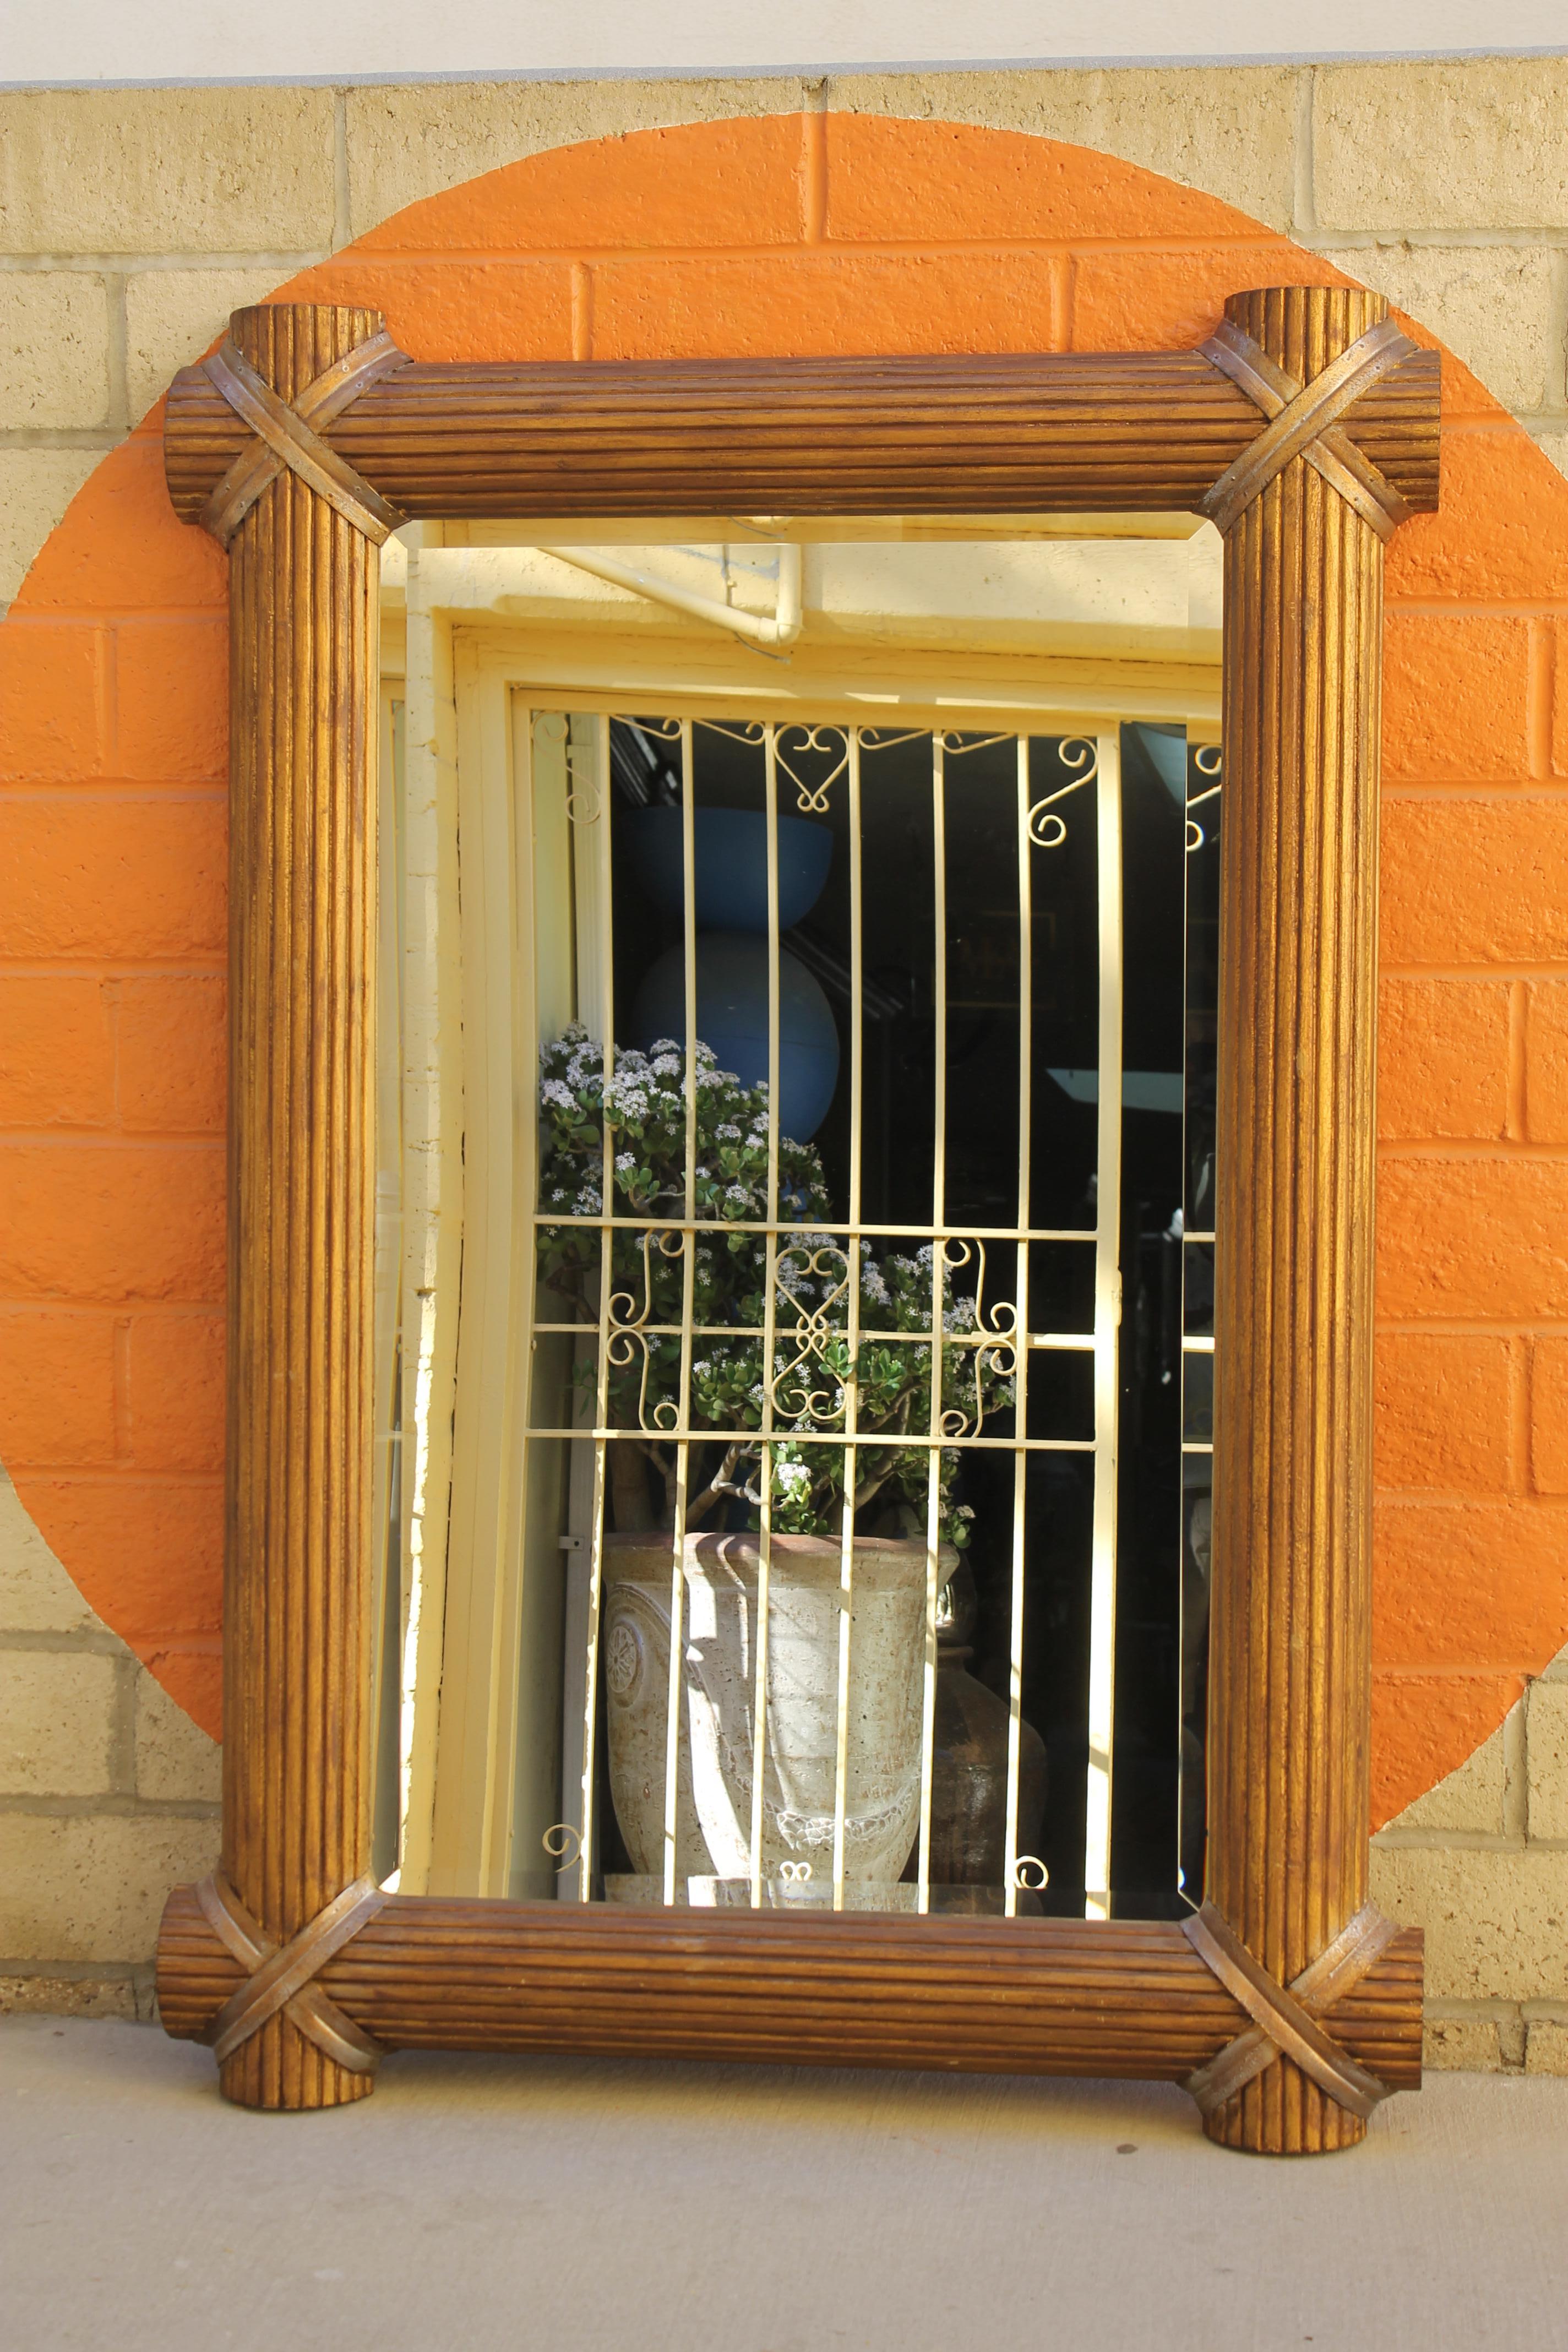 A substantially sized mirror featuring beveled glass and a 5.25